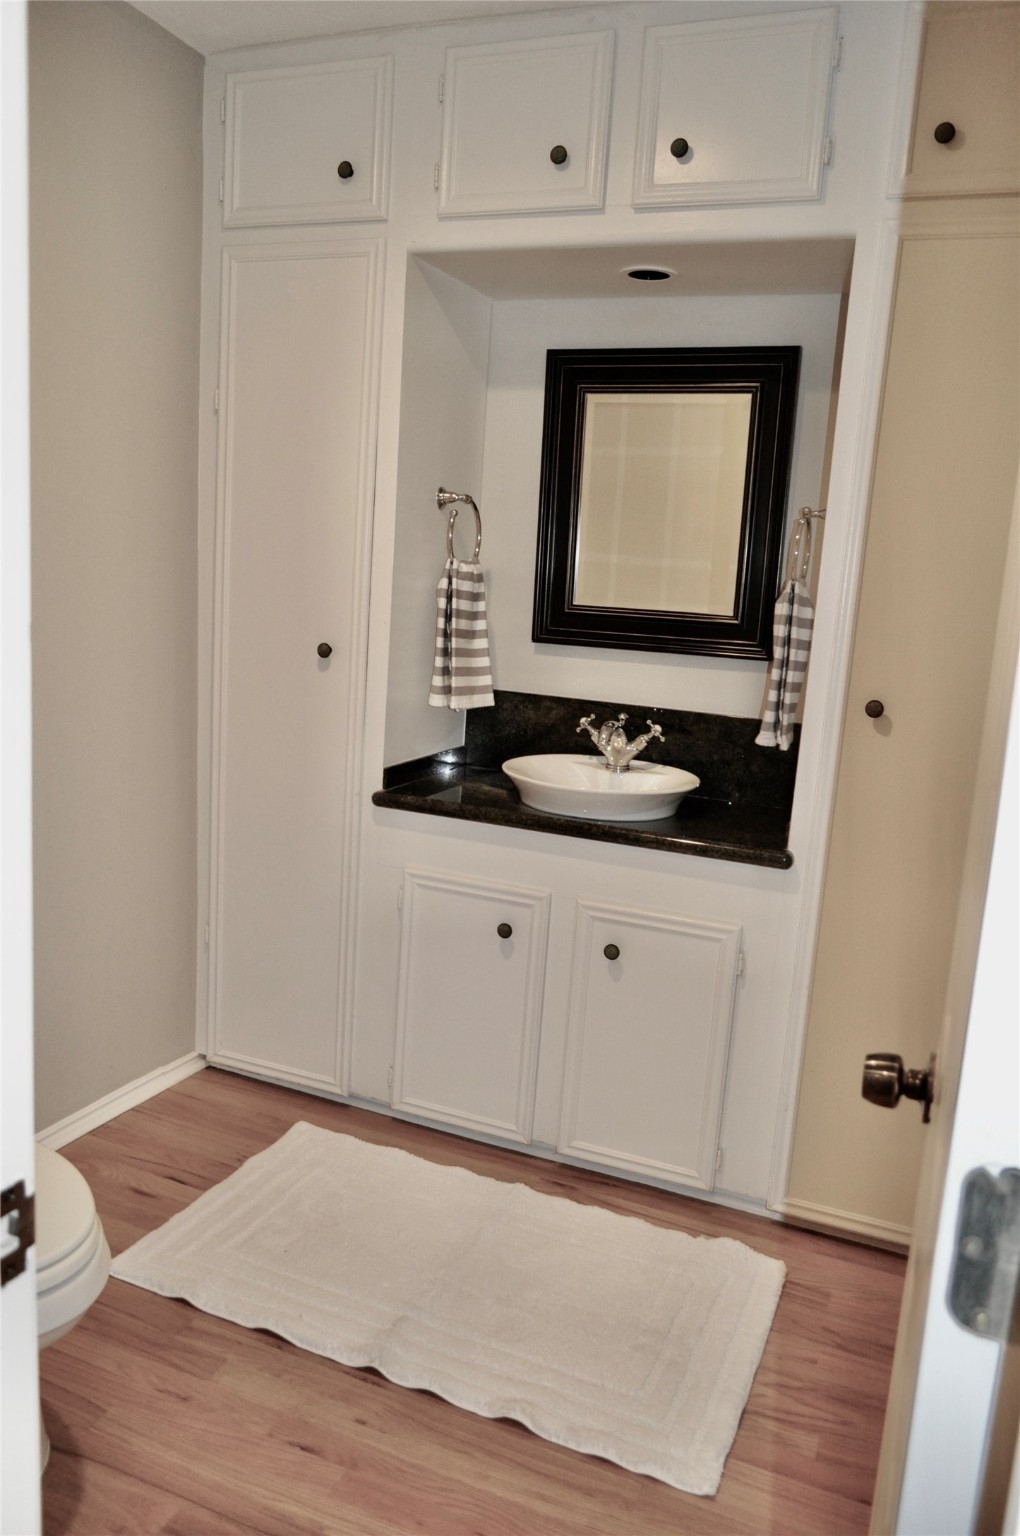 Large powder room with built-in cabinets.